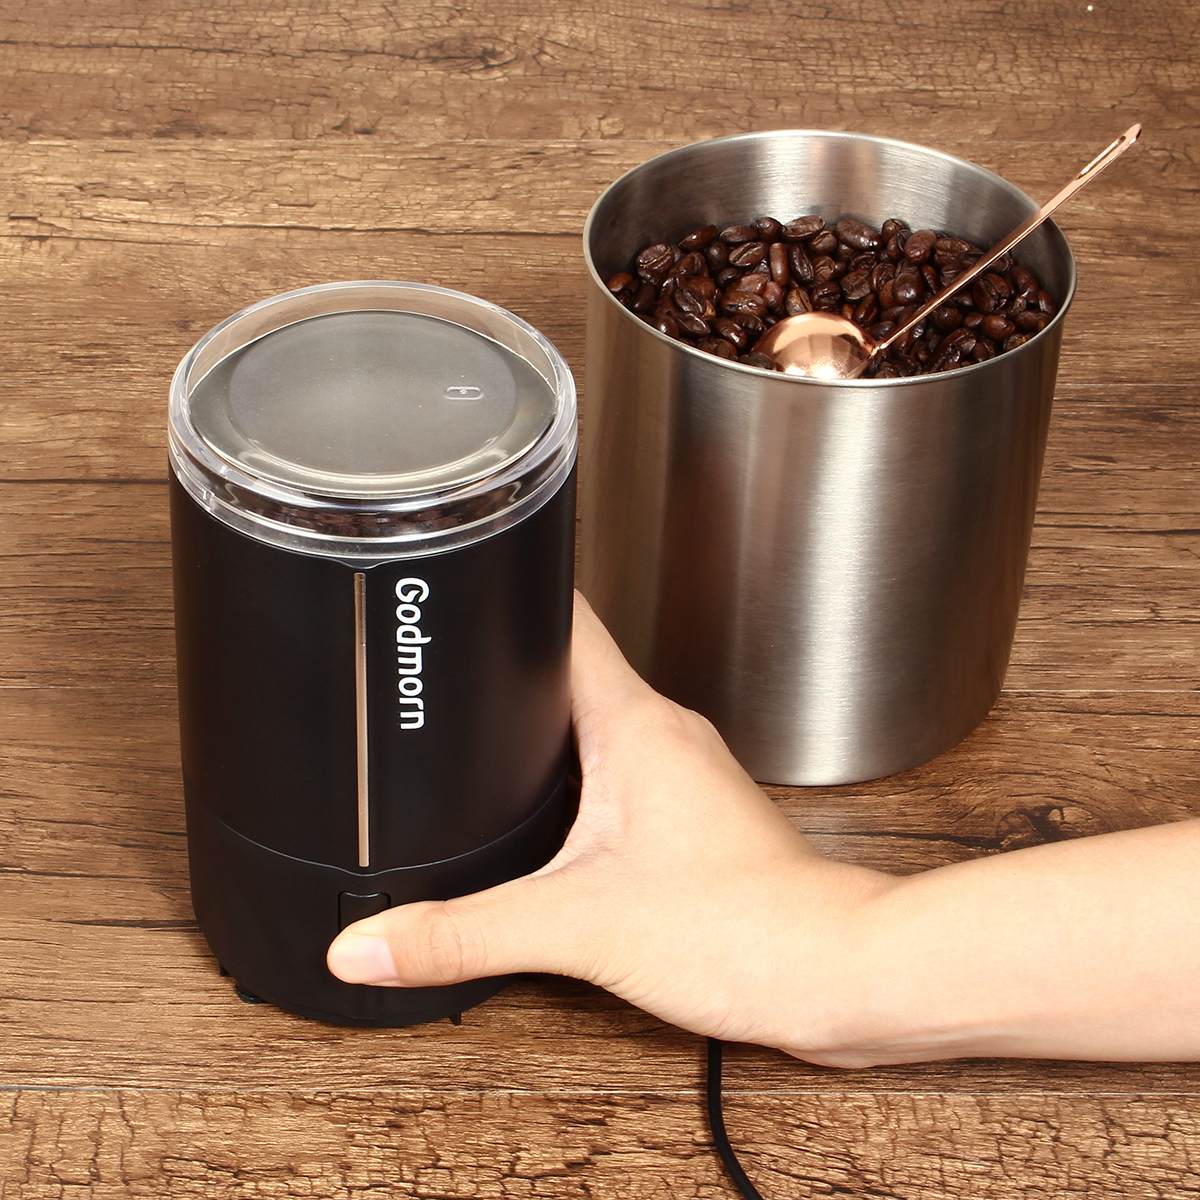 Electric Coffee Grinder Espresso Grinder One Touch Multi-function Bean Grinder Auto Shut Off & Overheating Protection 49